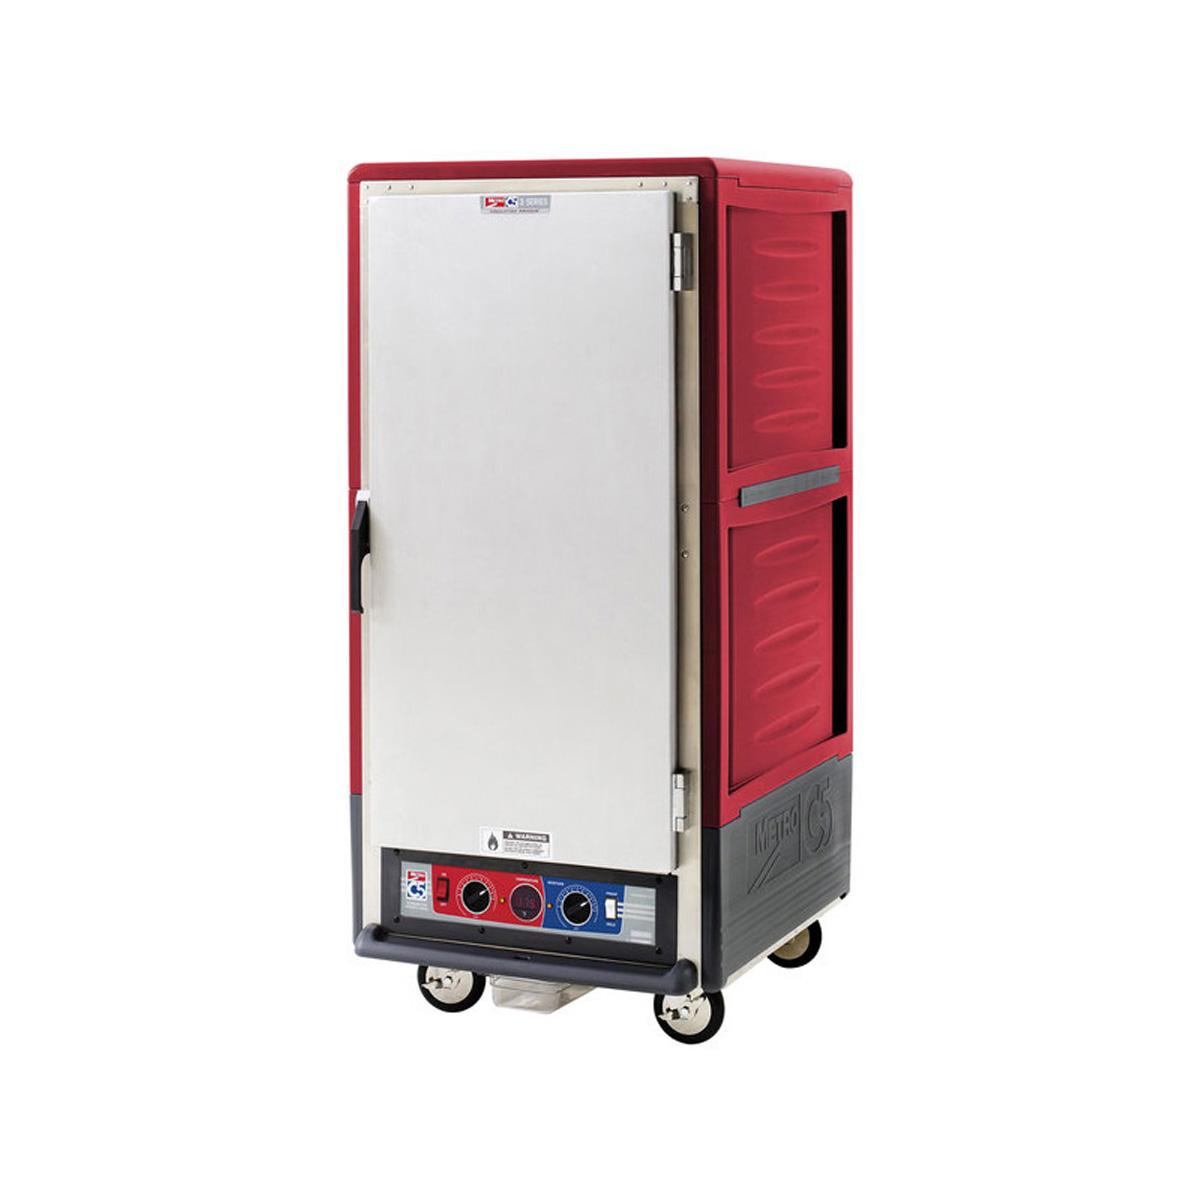 Metro C537-CLFS-4A C5 3 Series Mobile Heated Holding Proofing Cabinet